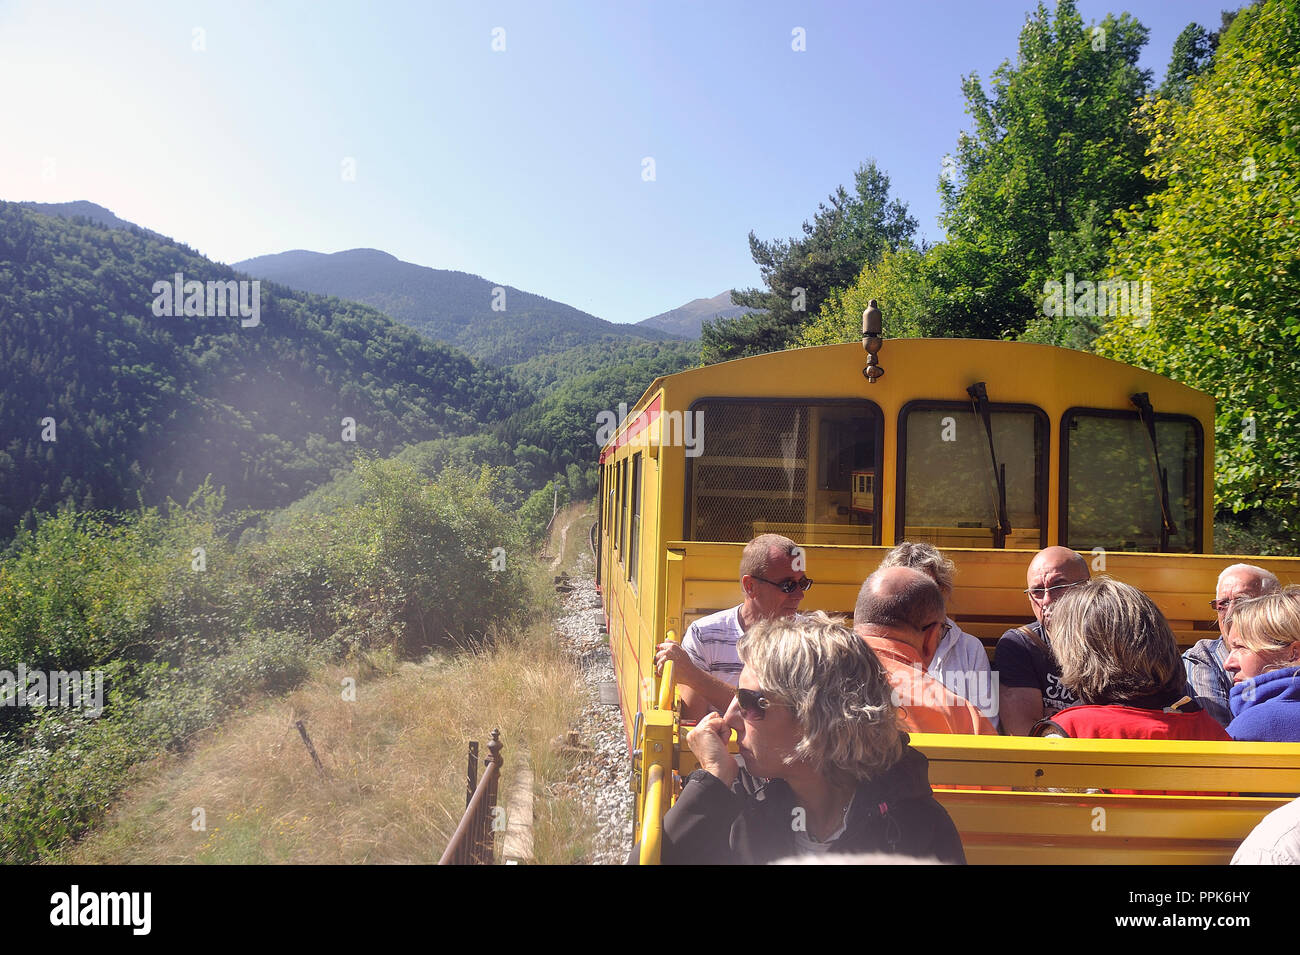 The small yellow trains of the Pyrenees crossing a beautiful mountain landscape Stock Photo